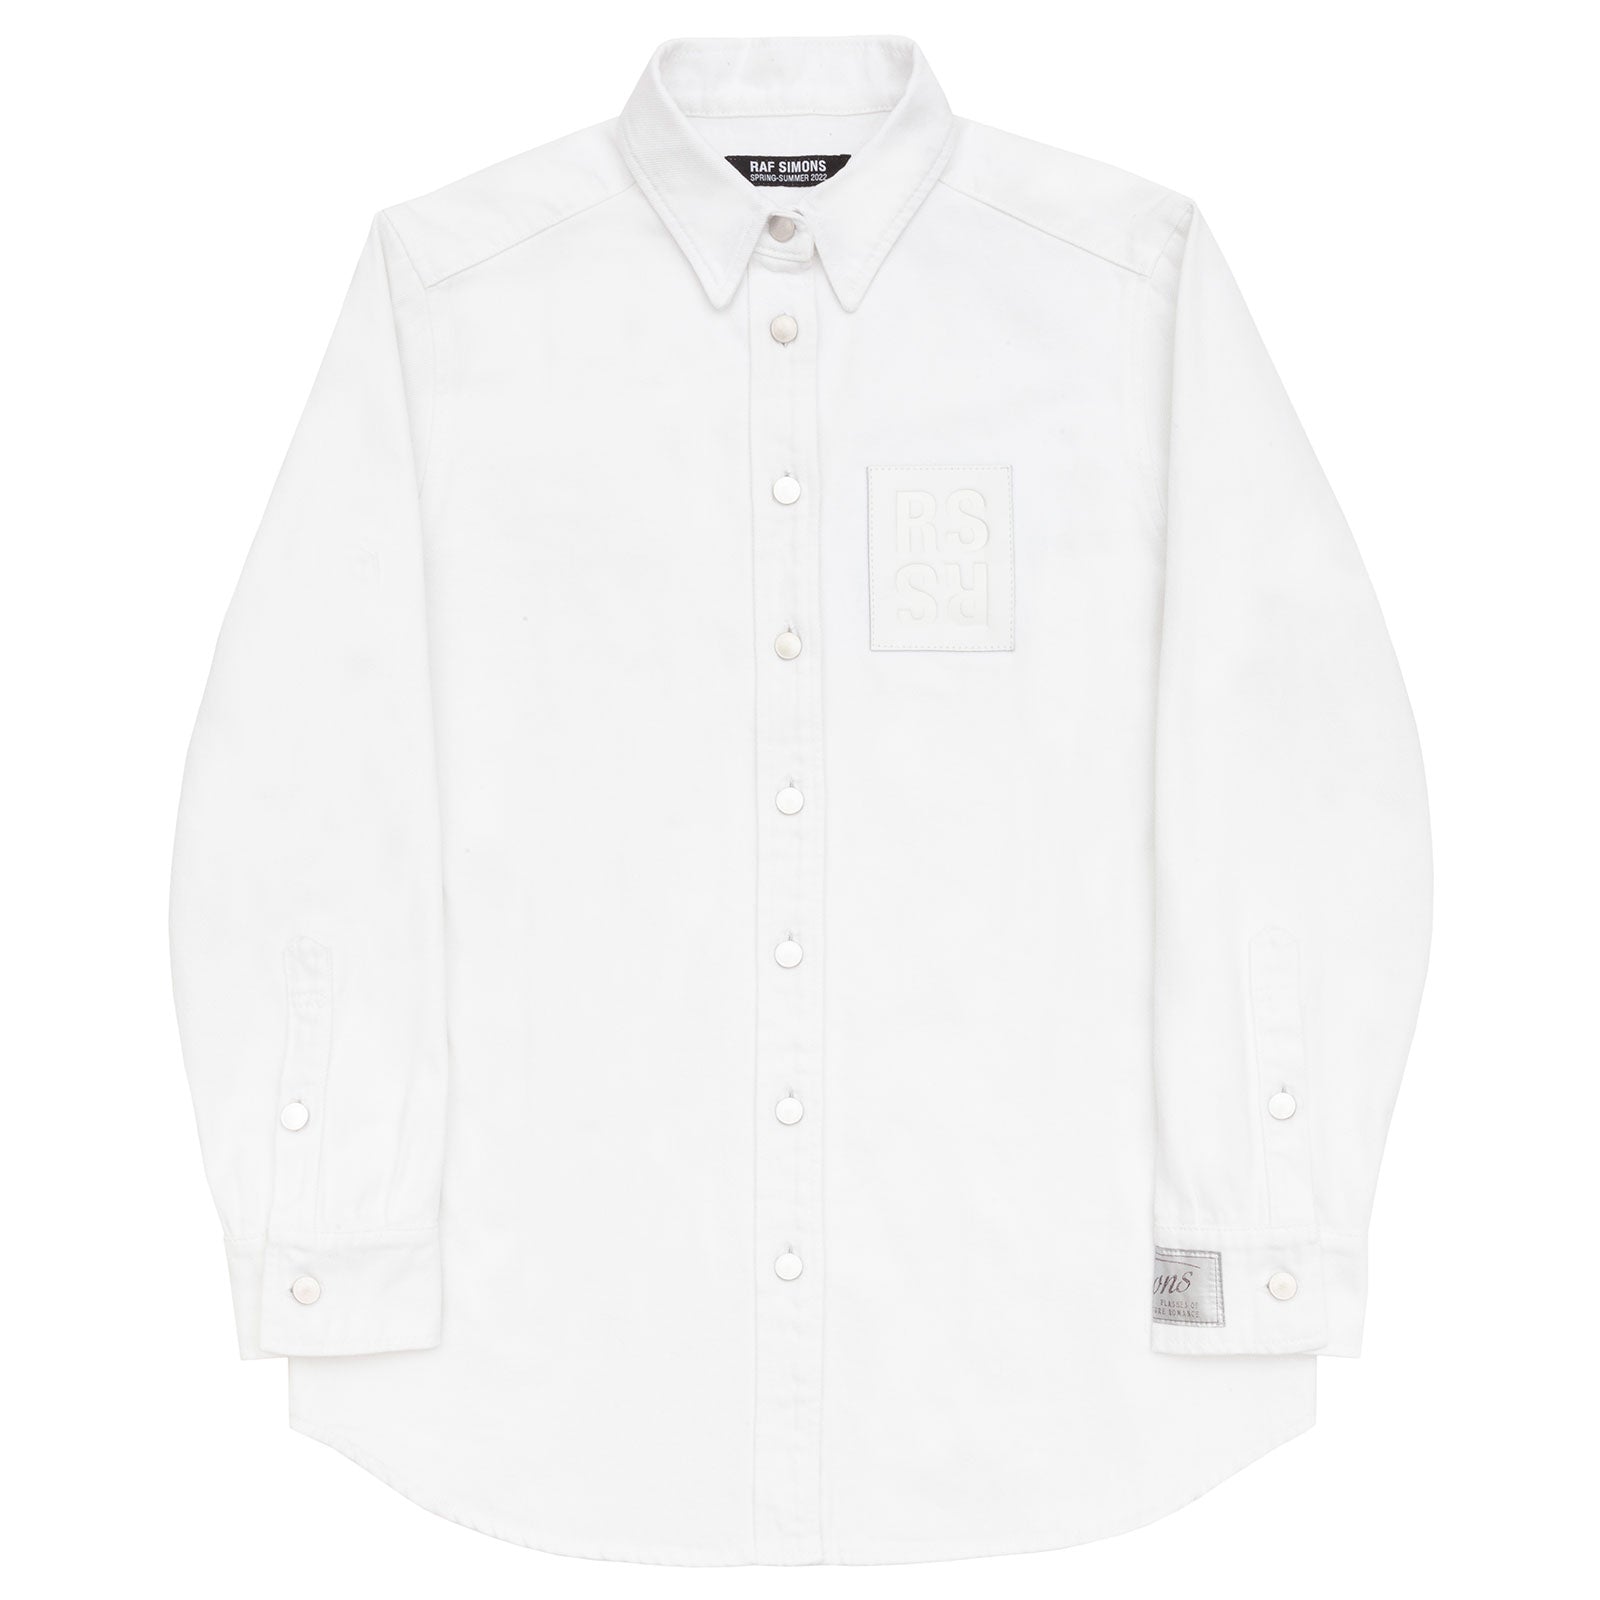 Raf simons. Straight fit denim shirt with label on sleeve ...